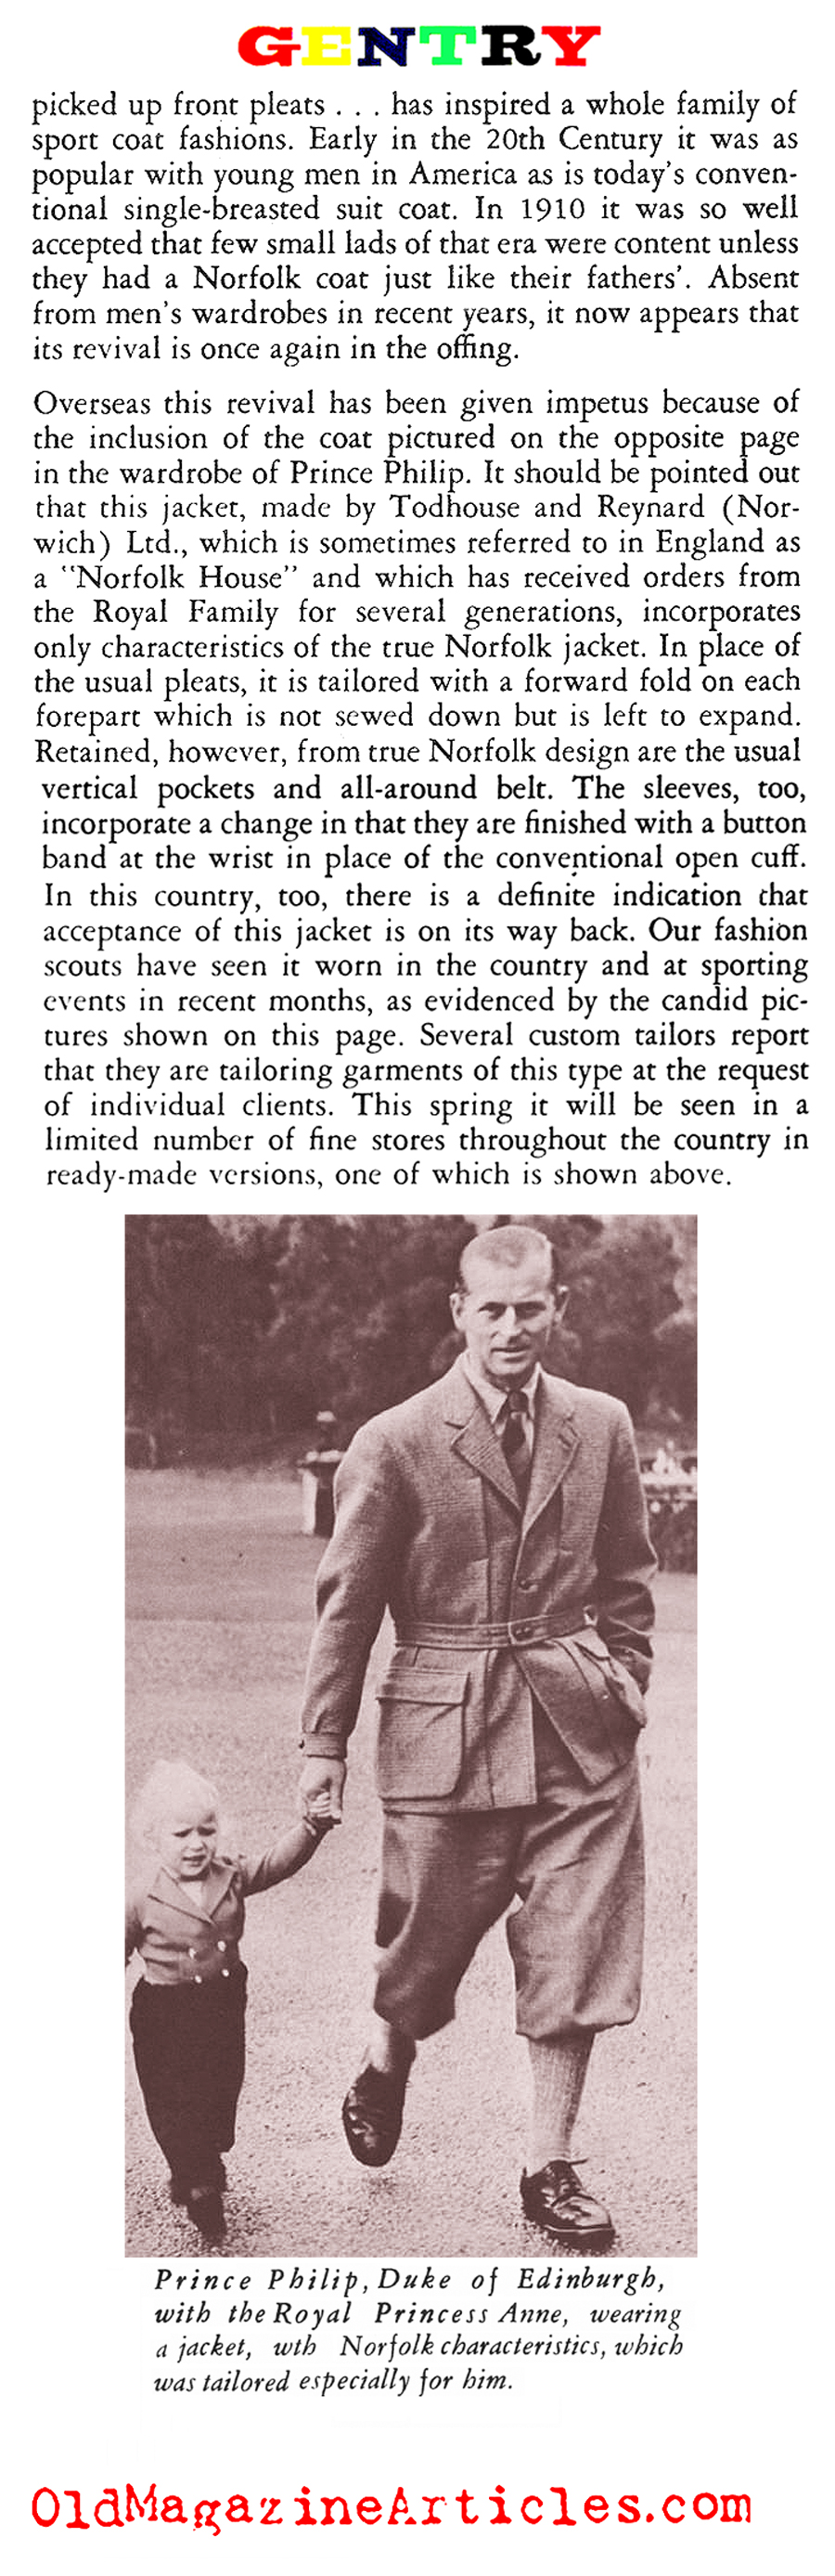 The Revival of the Norfolk Jacket (Gentry  Magazine, 1953)